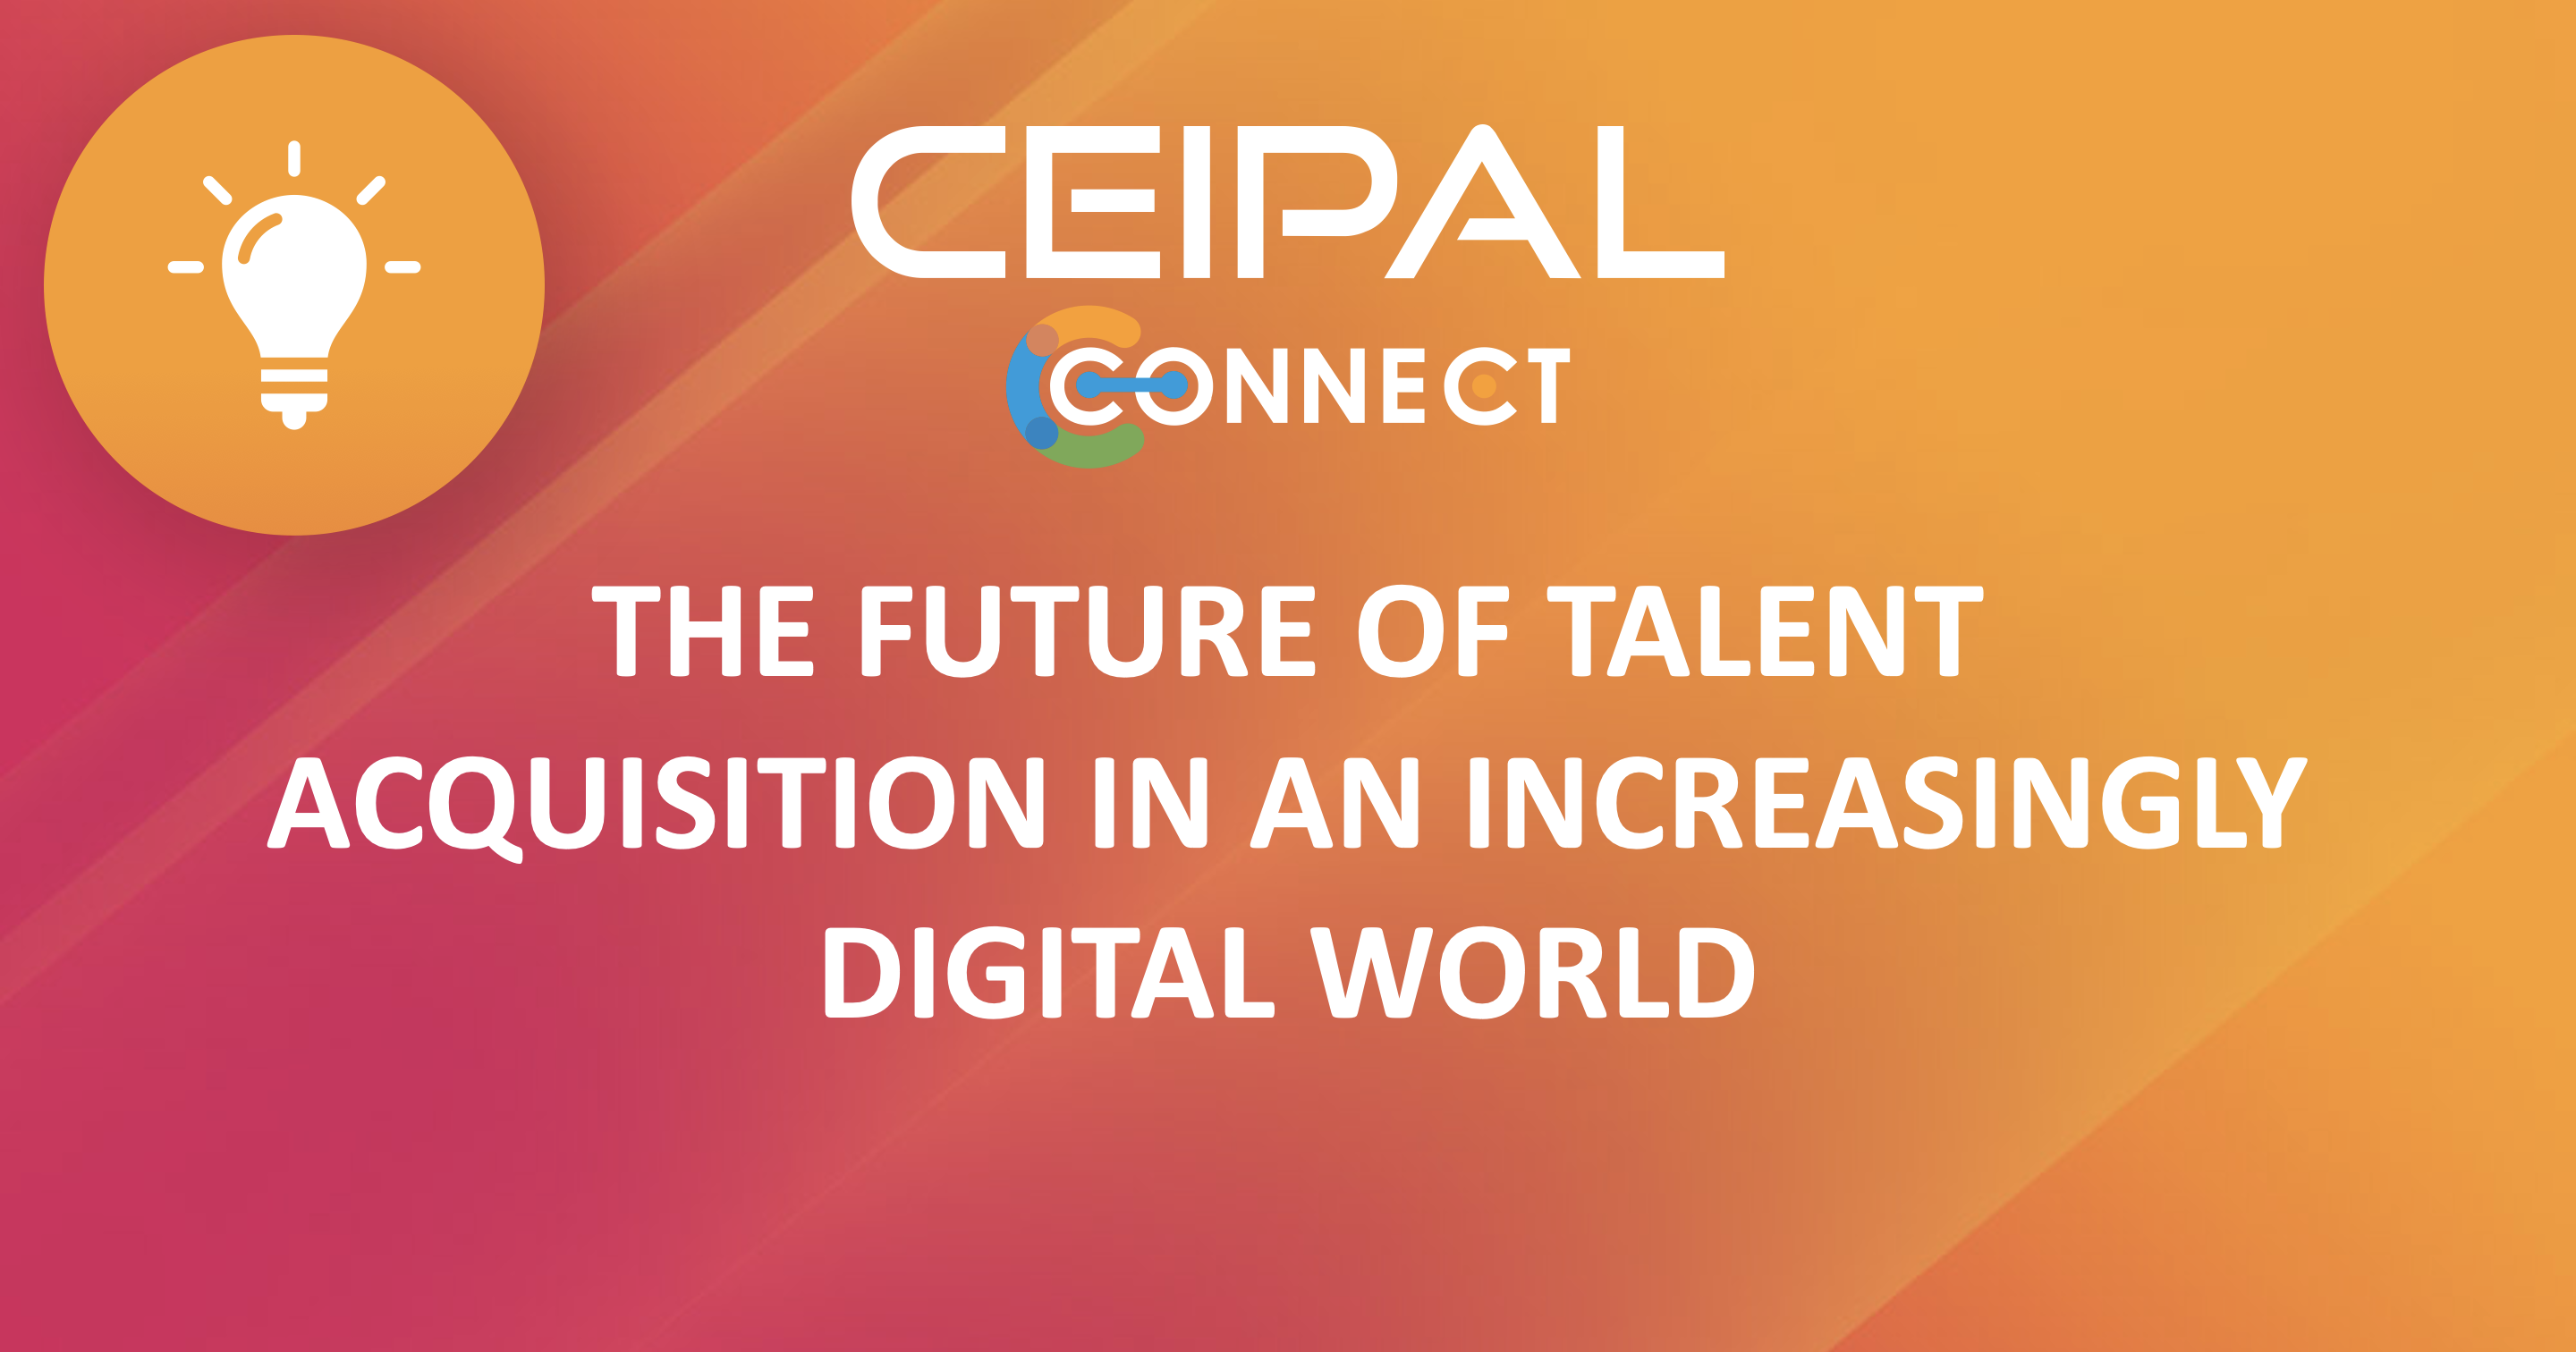 The Future of Talent Acquisition in an Increasingly Digital World